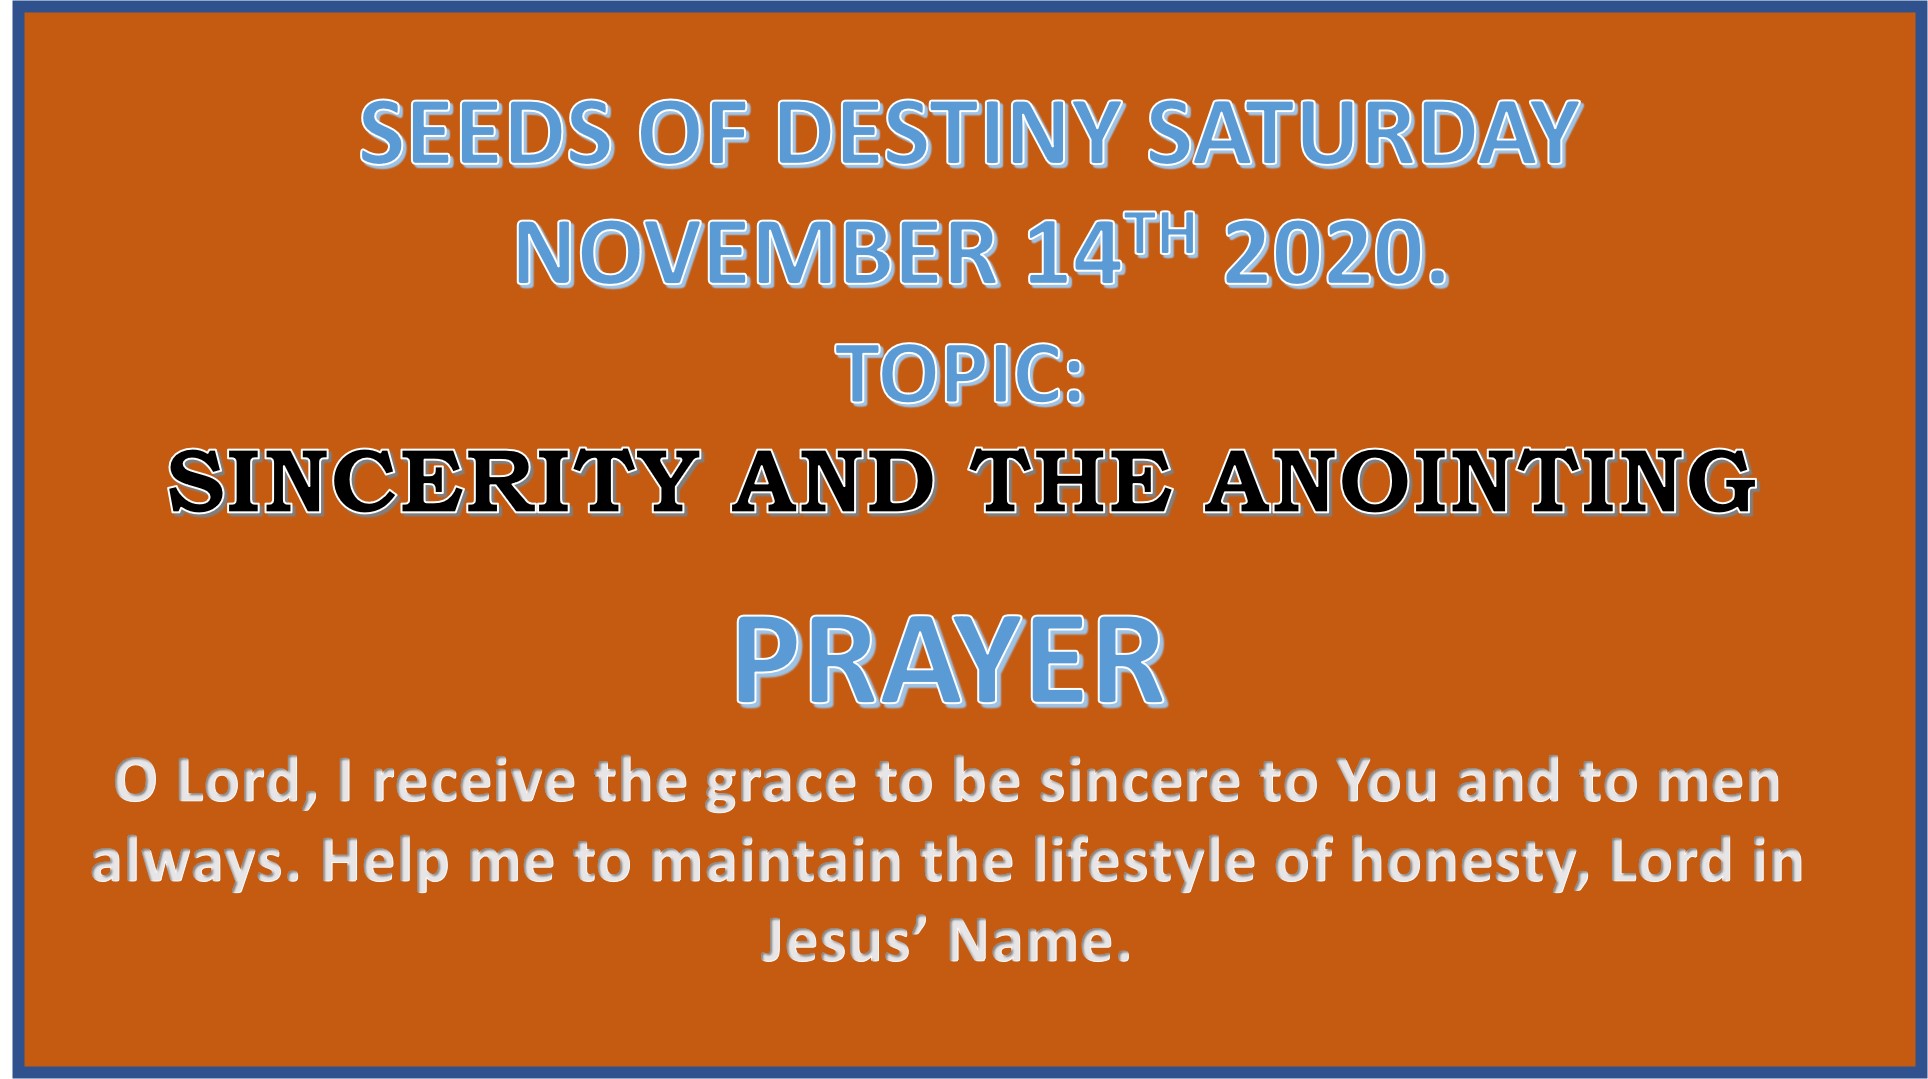 Seeds of Destiny Saturday 14th November 2020 by Dr Paul Enenche